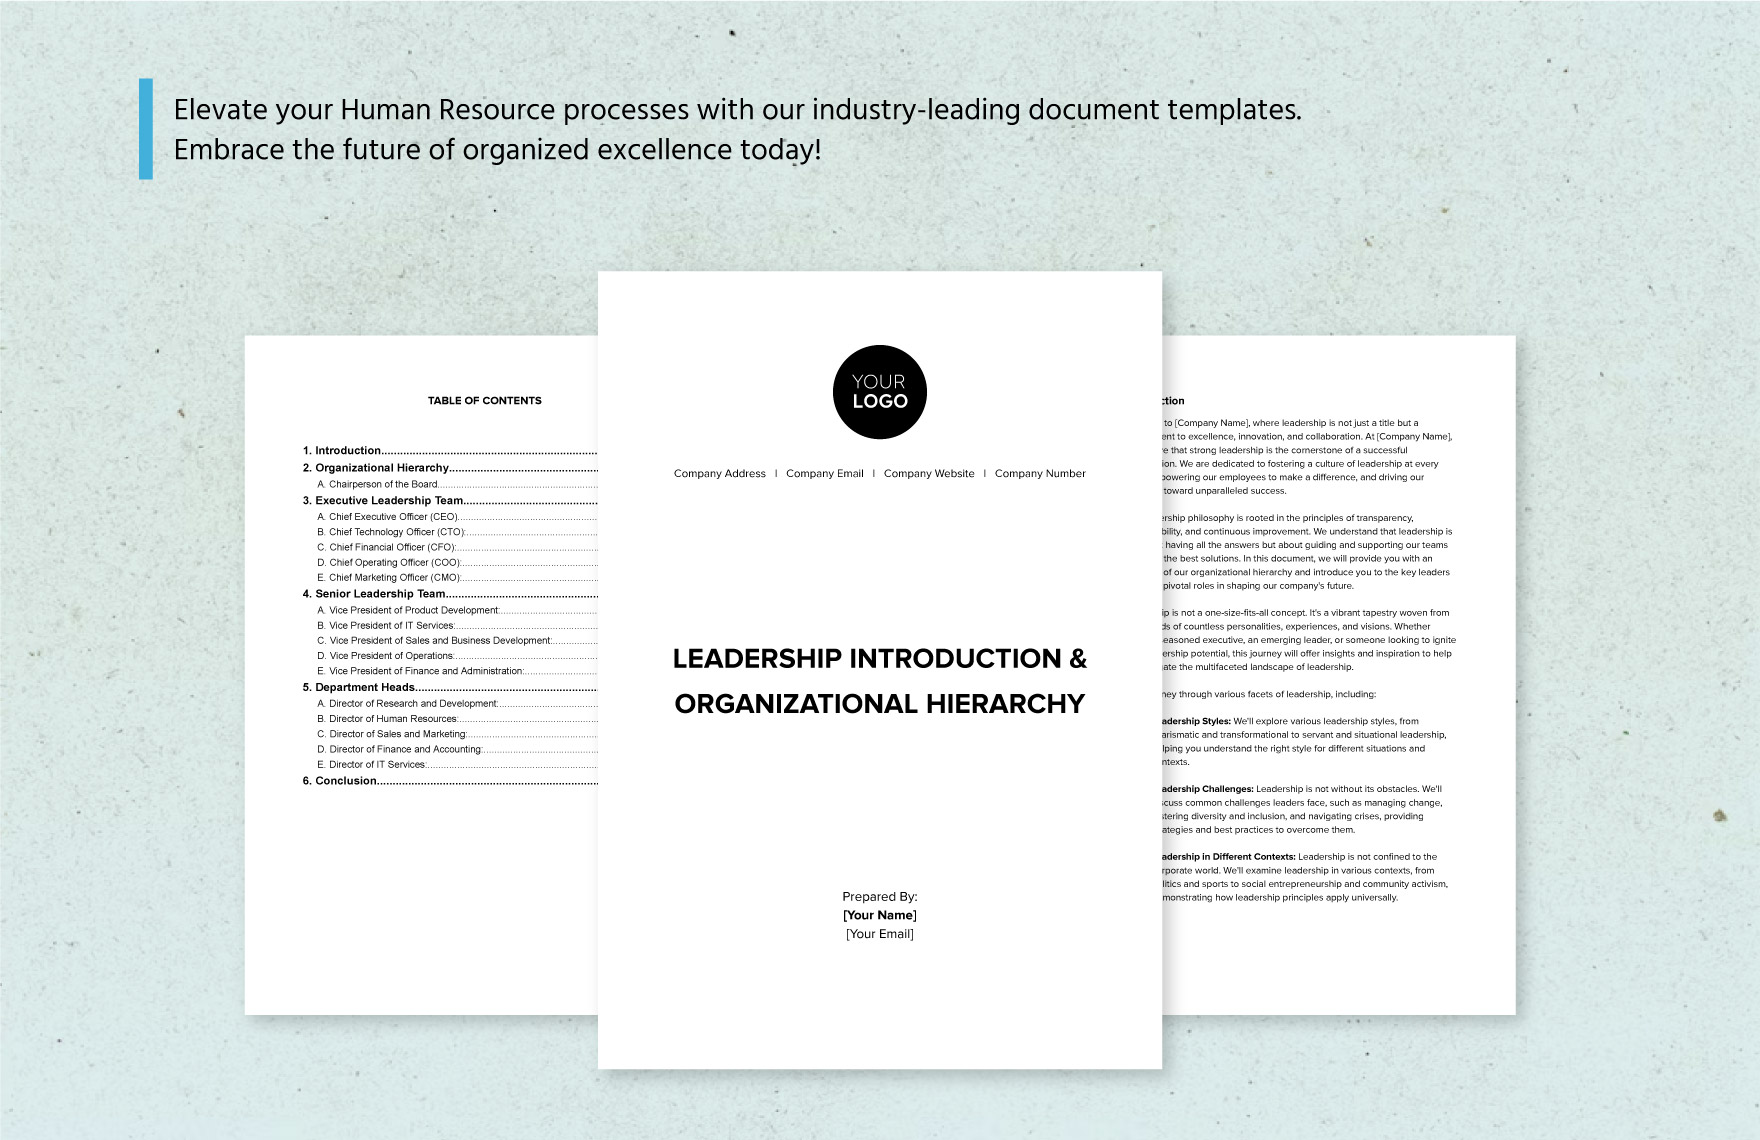 Leadership Introduction & Organizational Hierarchy HR Template